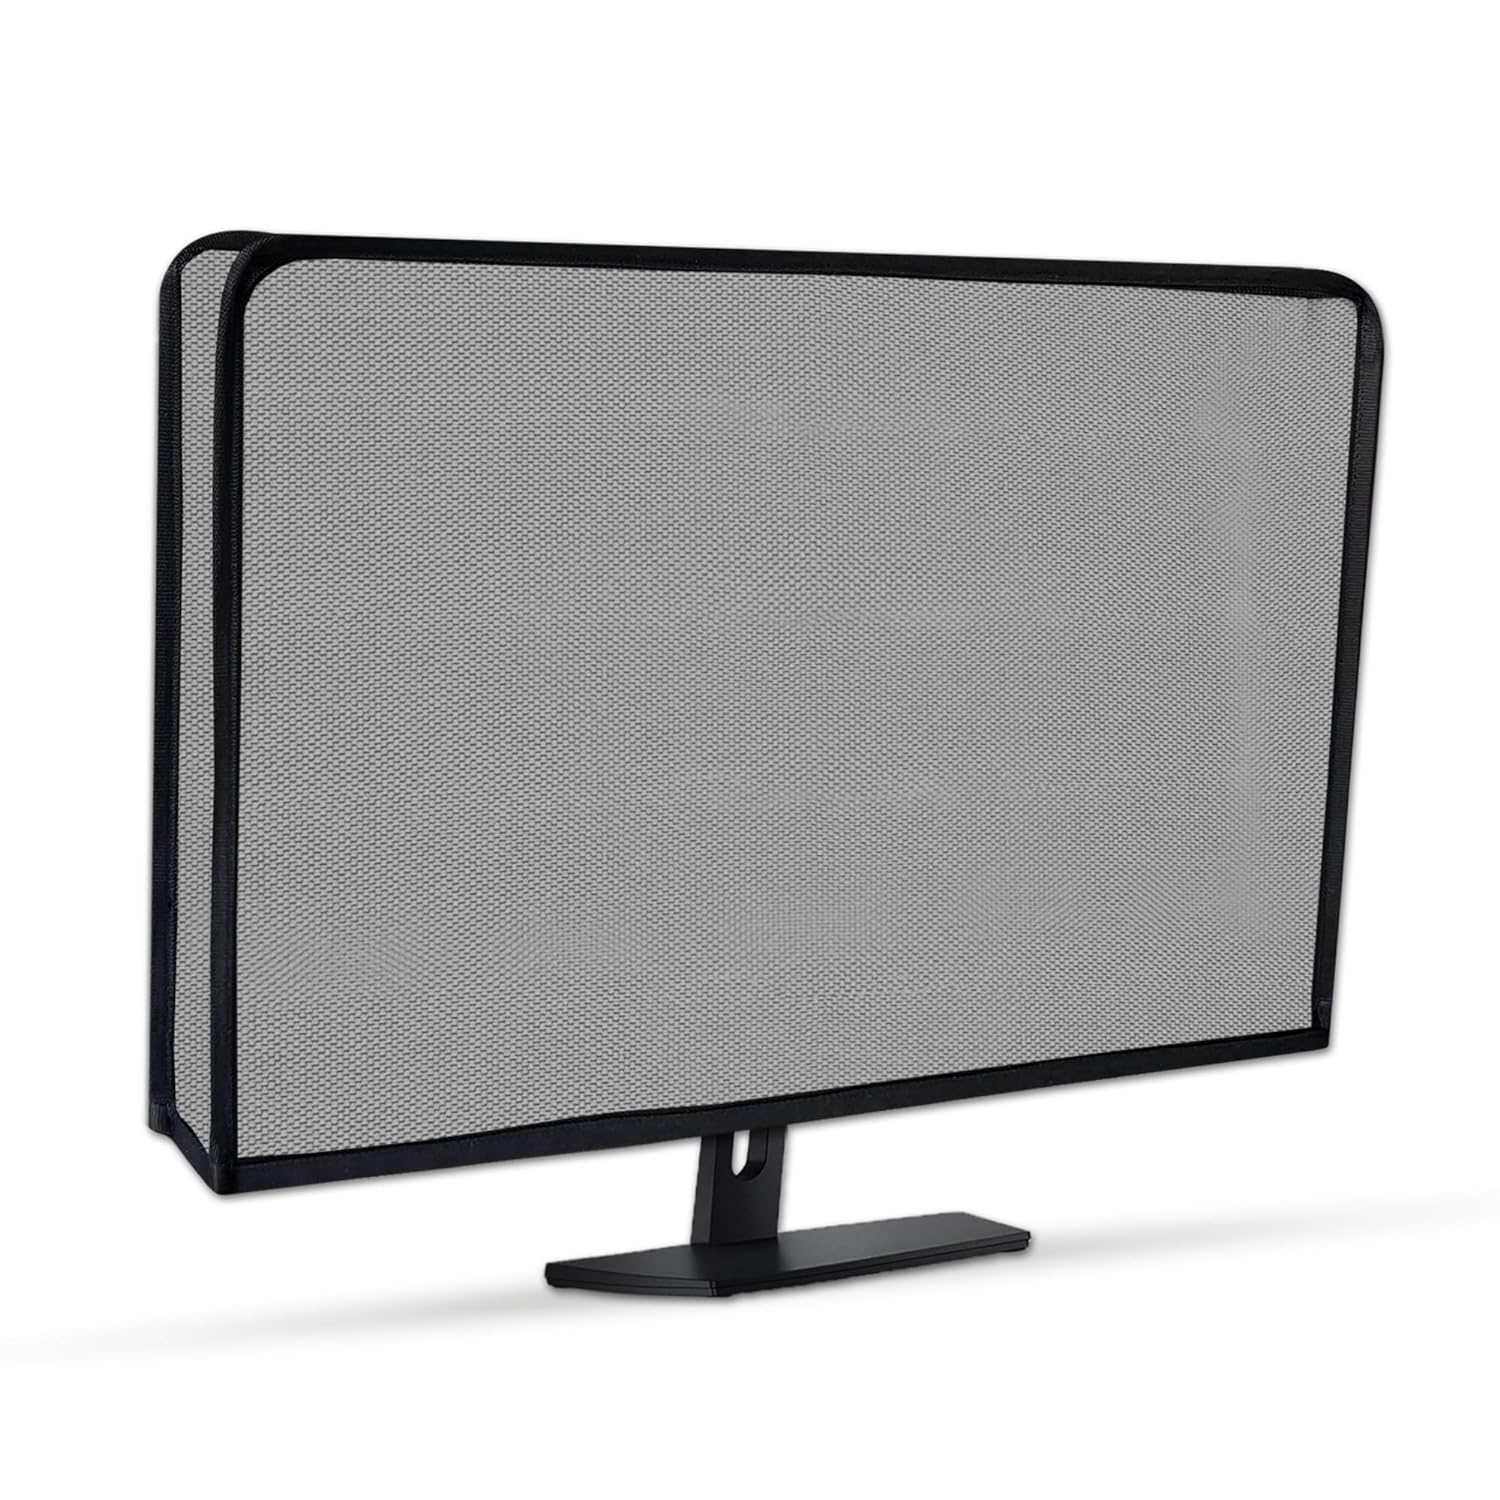 Dust-Proof Water-Resistant Cover for Computer 24 LCD/ LED Monitor (Grey)